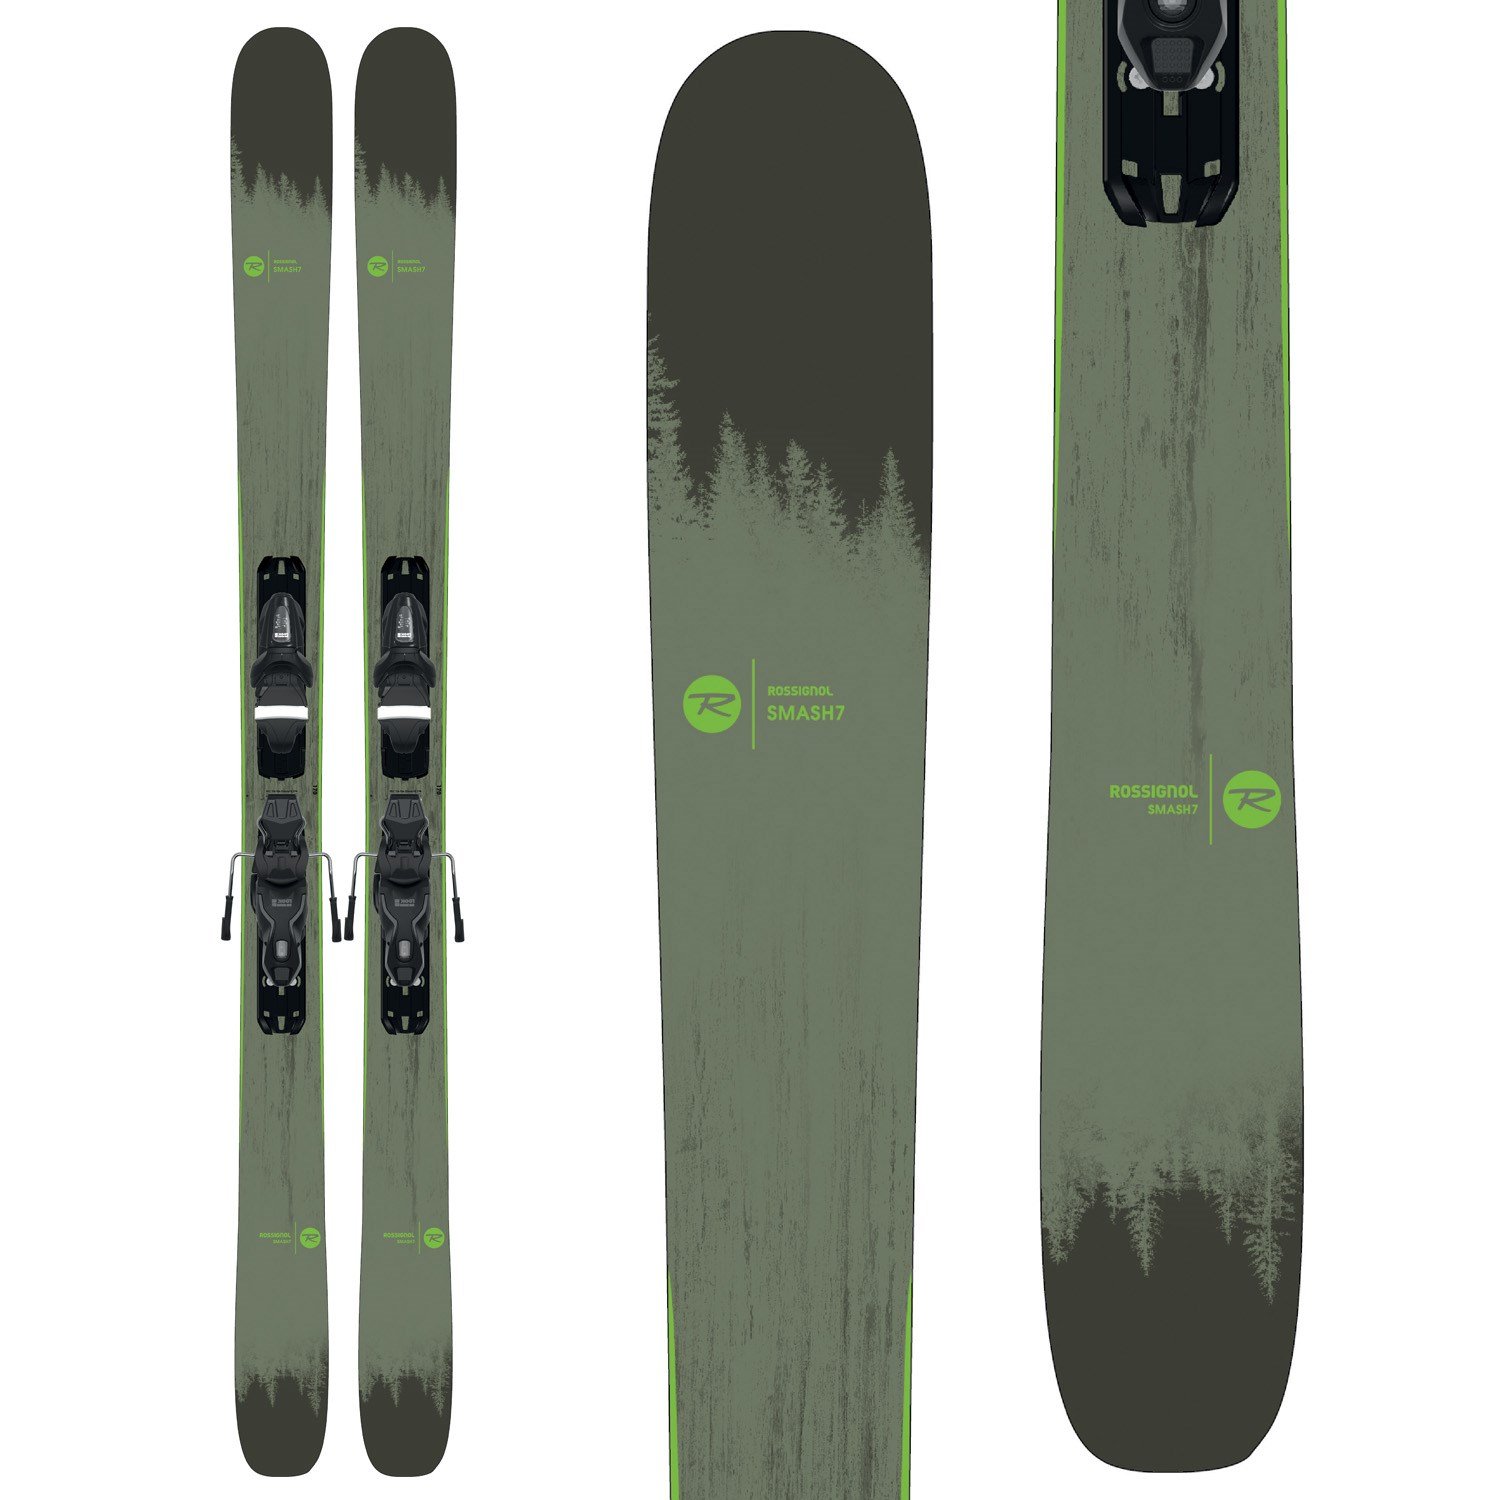 CLEARANCE Rossignol Smash 7 snow skis 170cm with bindings New 2019